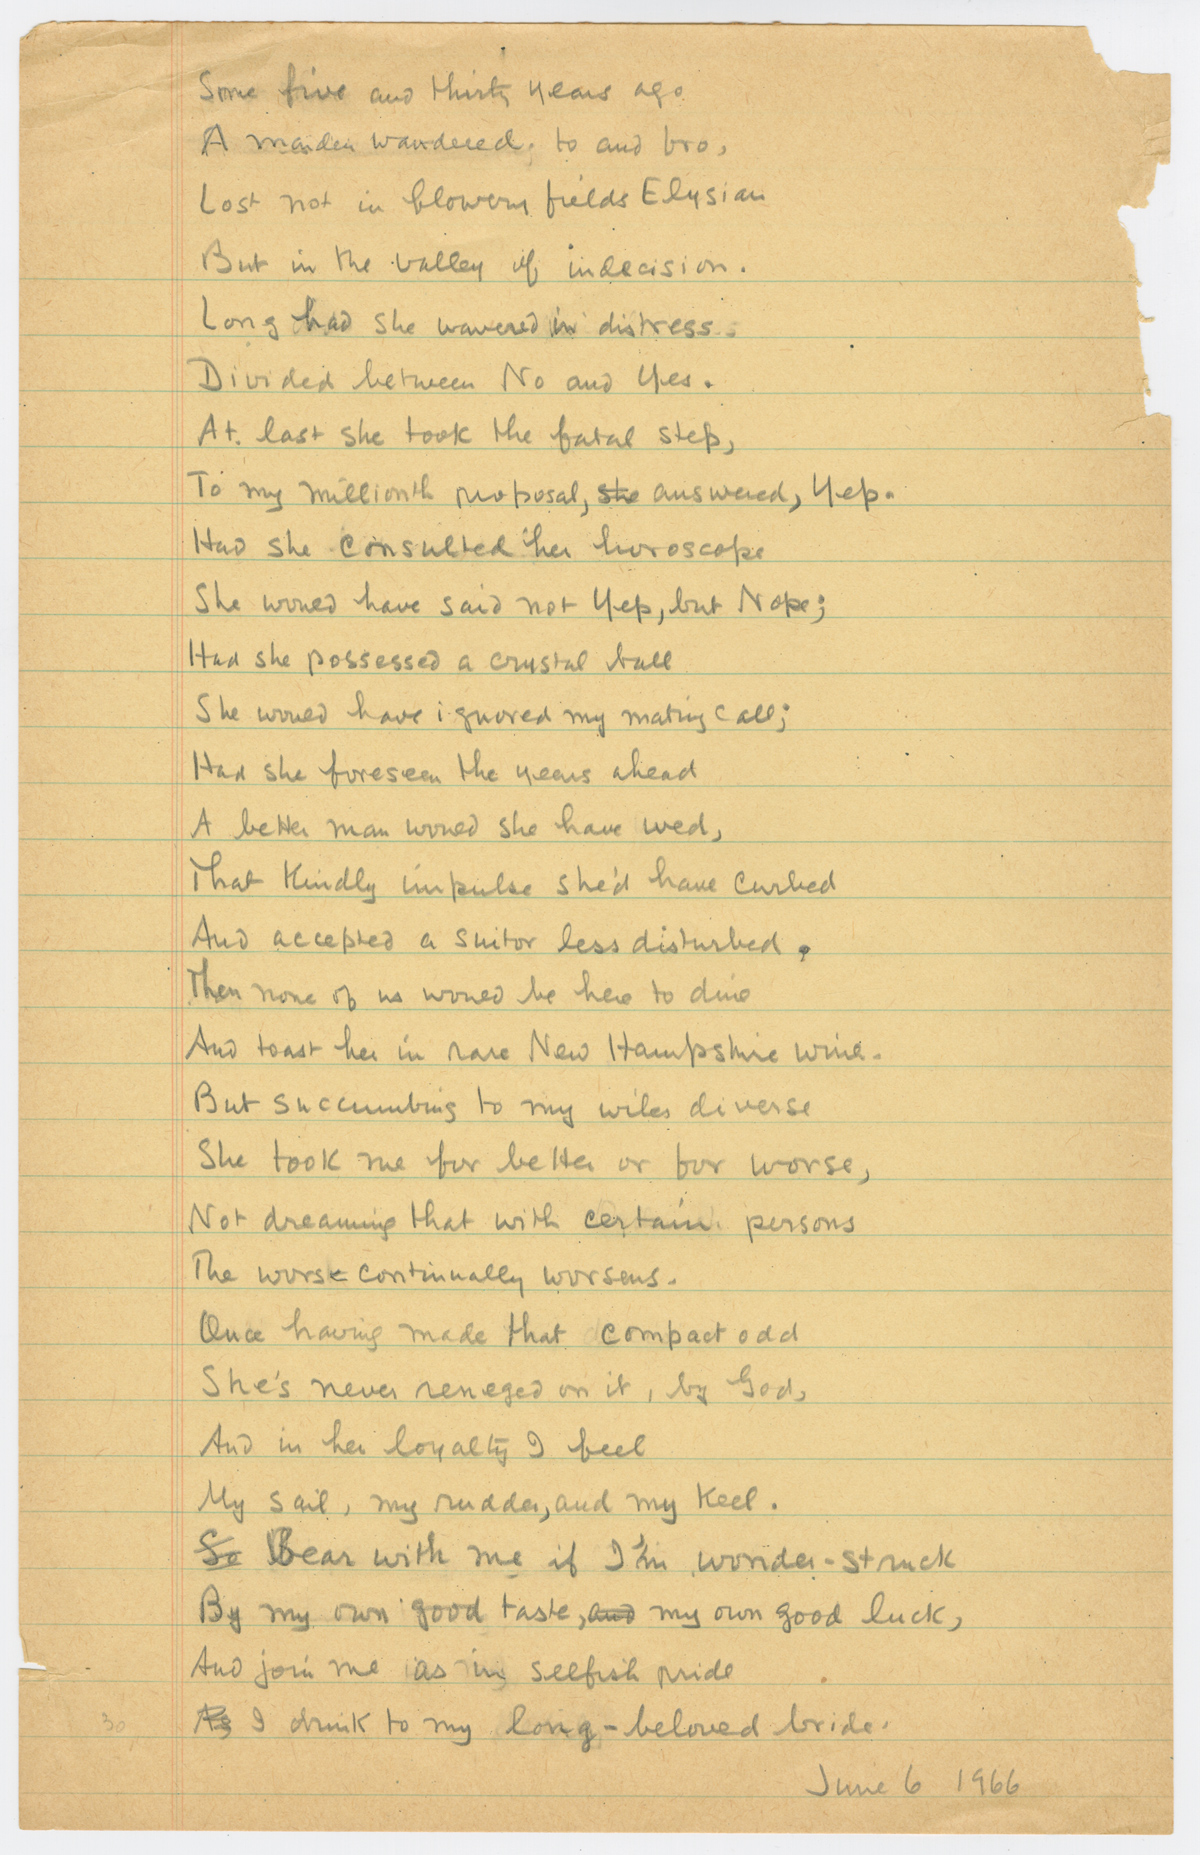 Manuscript of Ogden Nash’s untitled poem, noted by the author for their 35th Wedding Anniversary Dinner, June 6, 1966.